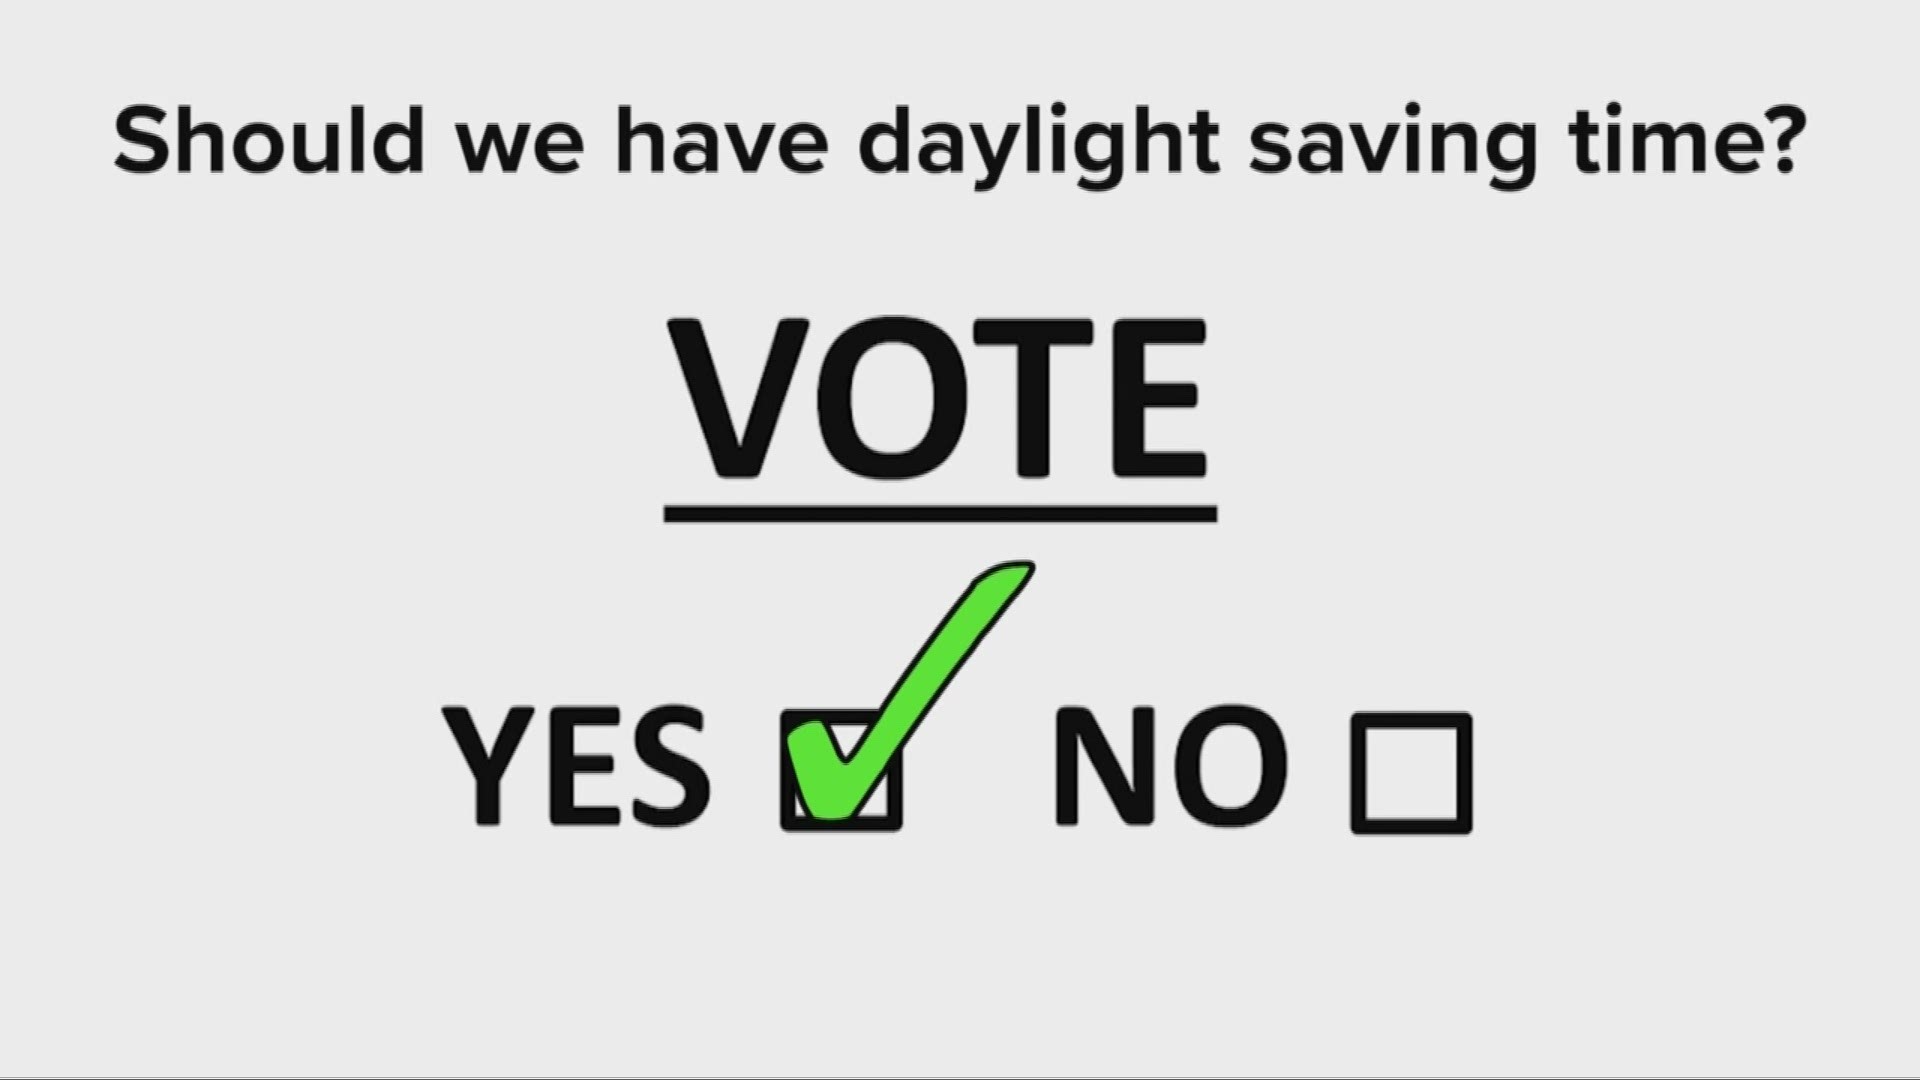 Californians voted to end Daylight Saving Time, so why are we still changing our clocks this weekend?